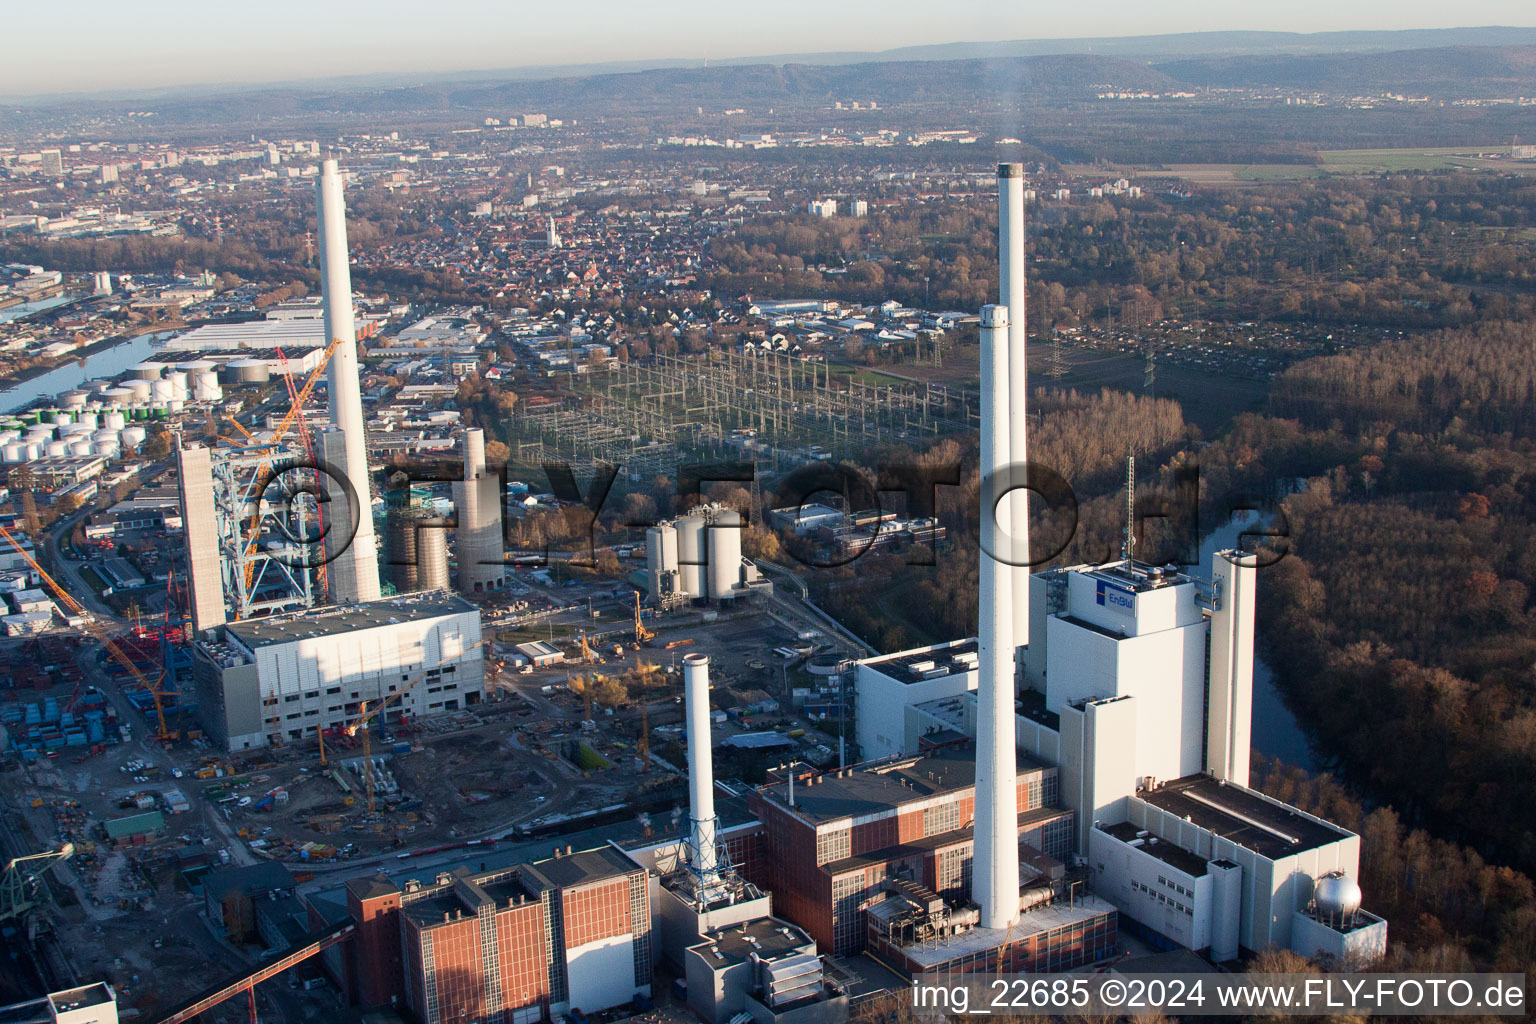 Oblique view of EnBW power plant in the district Rheinhafen in Karlsruhe in the state Baden-Wuerttemberg, Germany